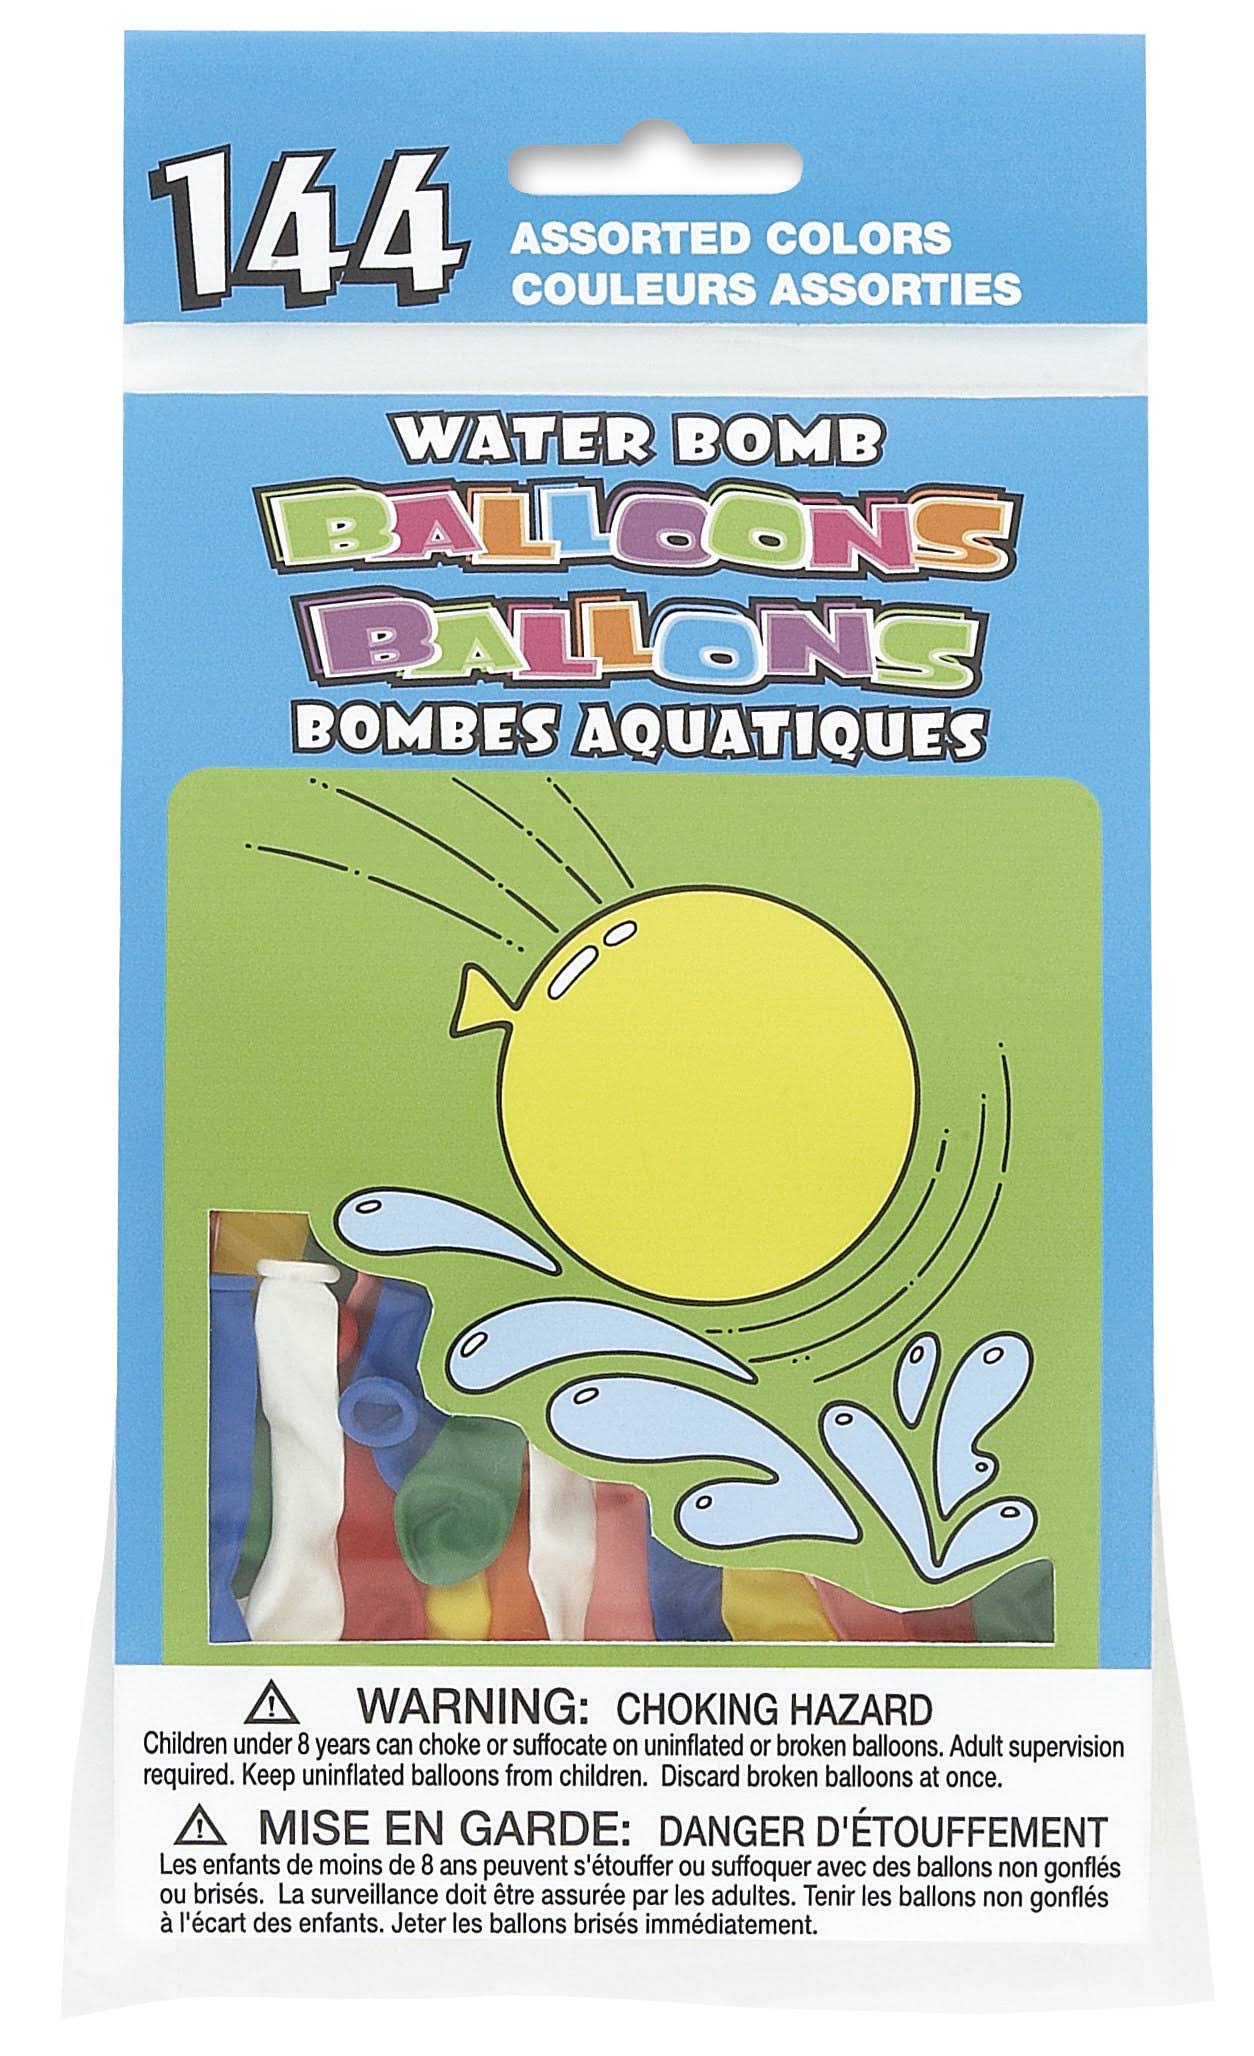 Unique Industries Water Balloons - Assorted, 144ct